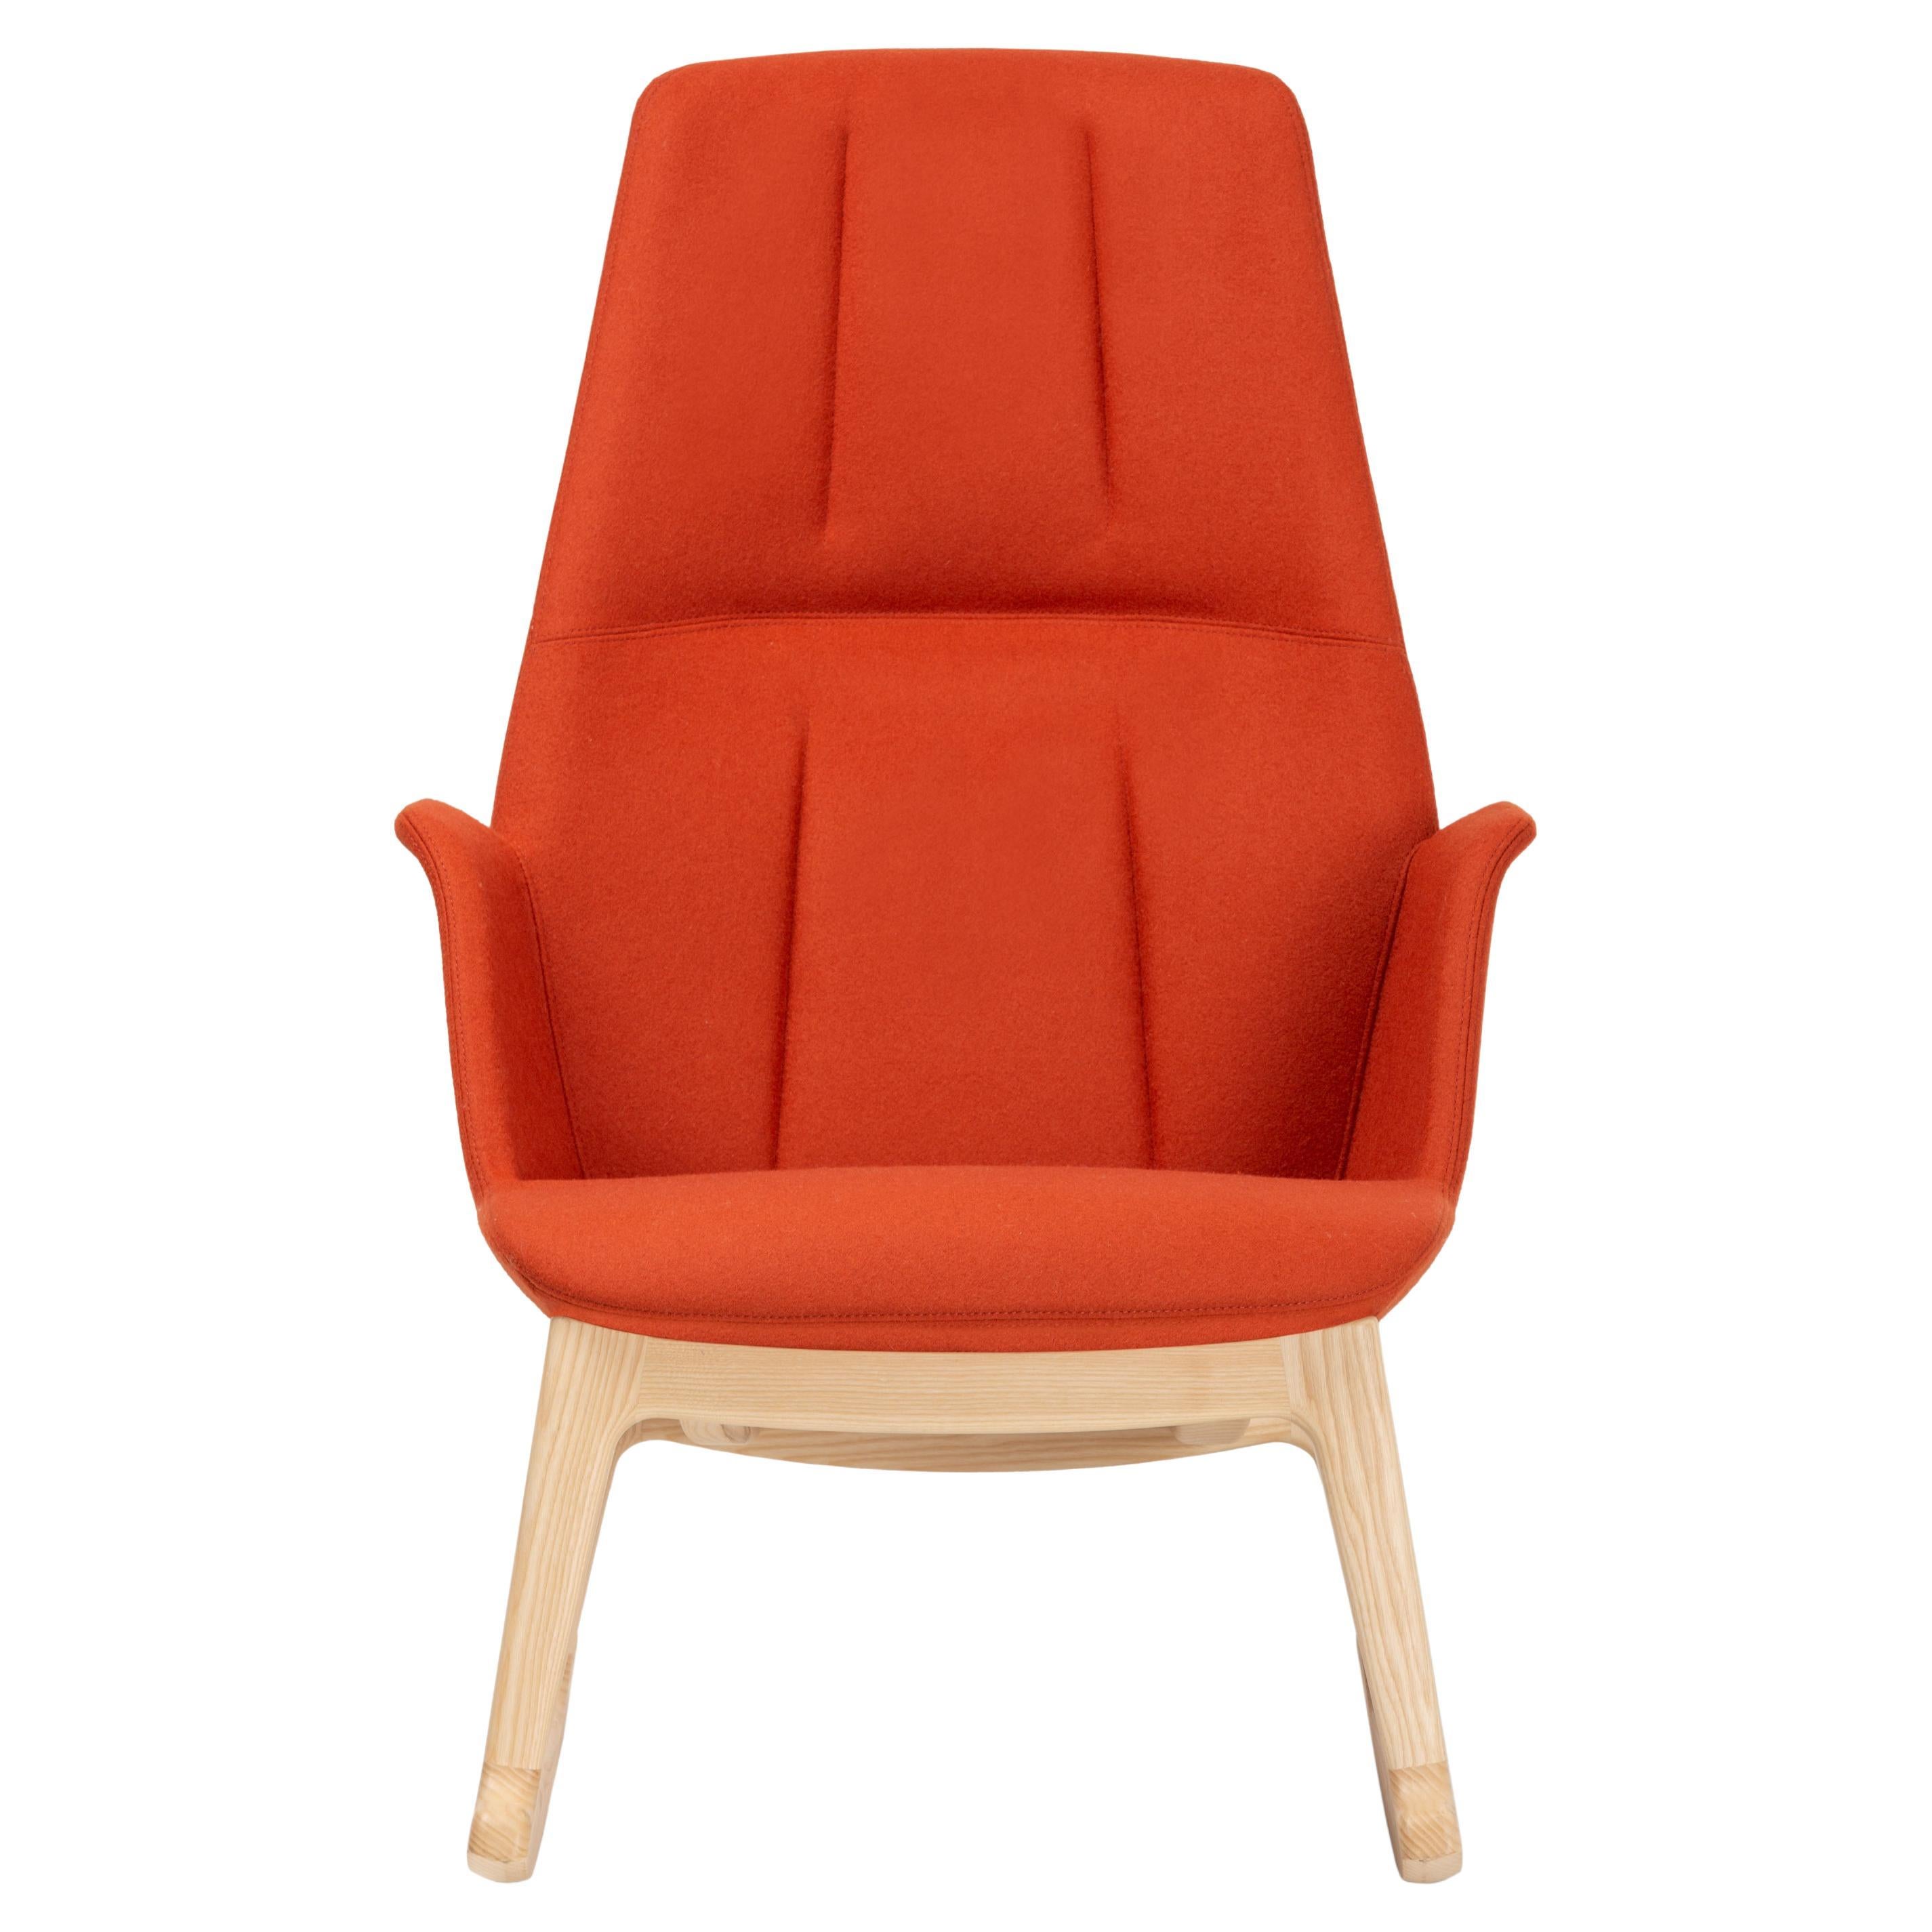 21st Century Modern Red Wooden Rocking Armchair Hive Made in Italy